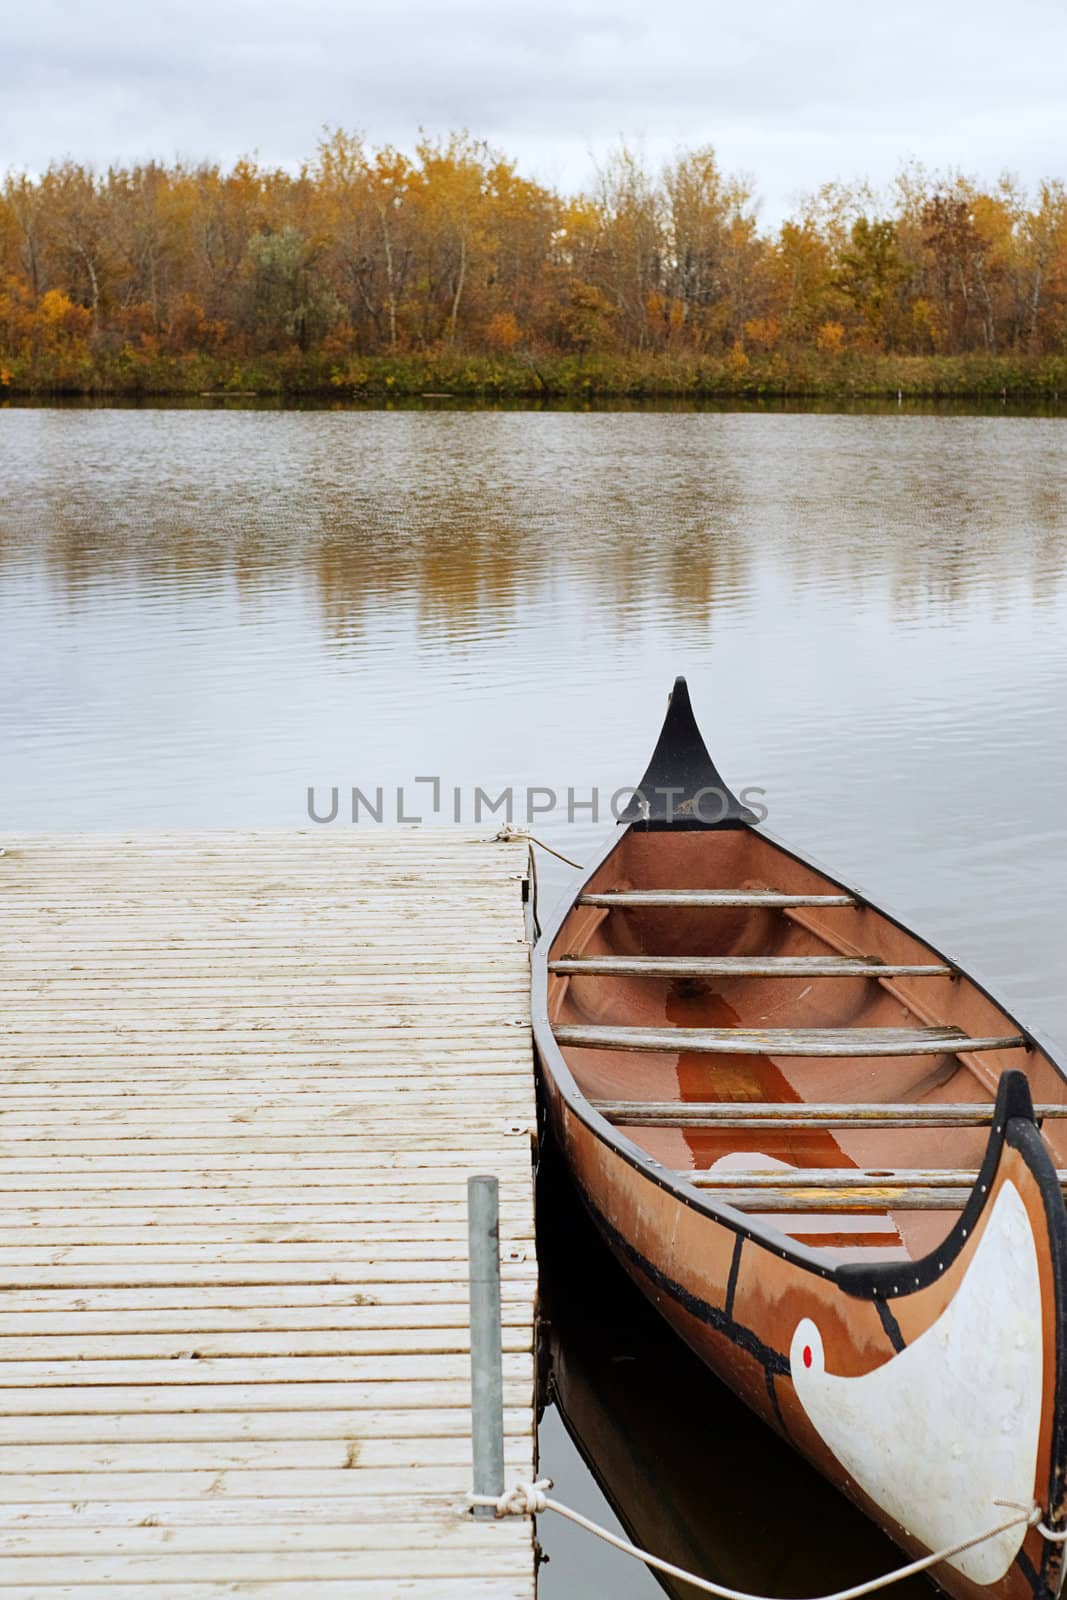 A canoe docked and floating on the river, shot on a cloudy day